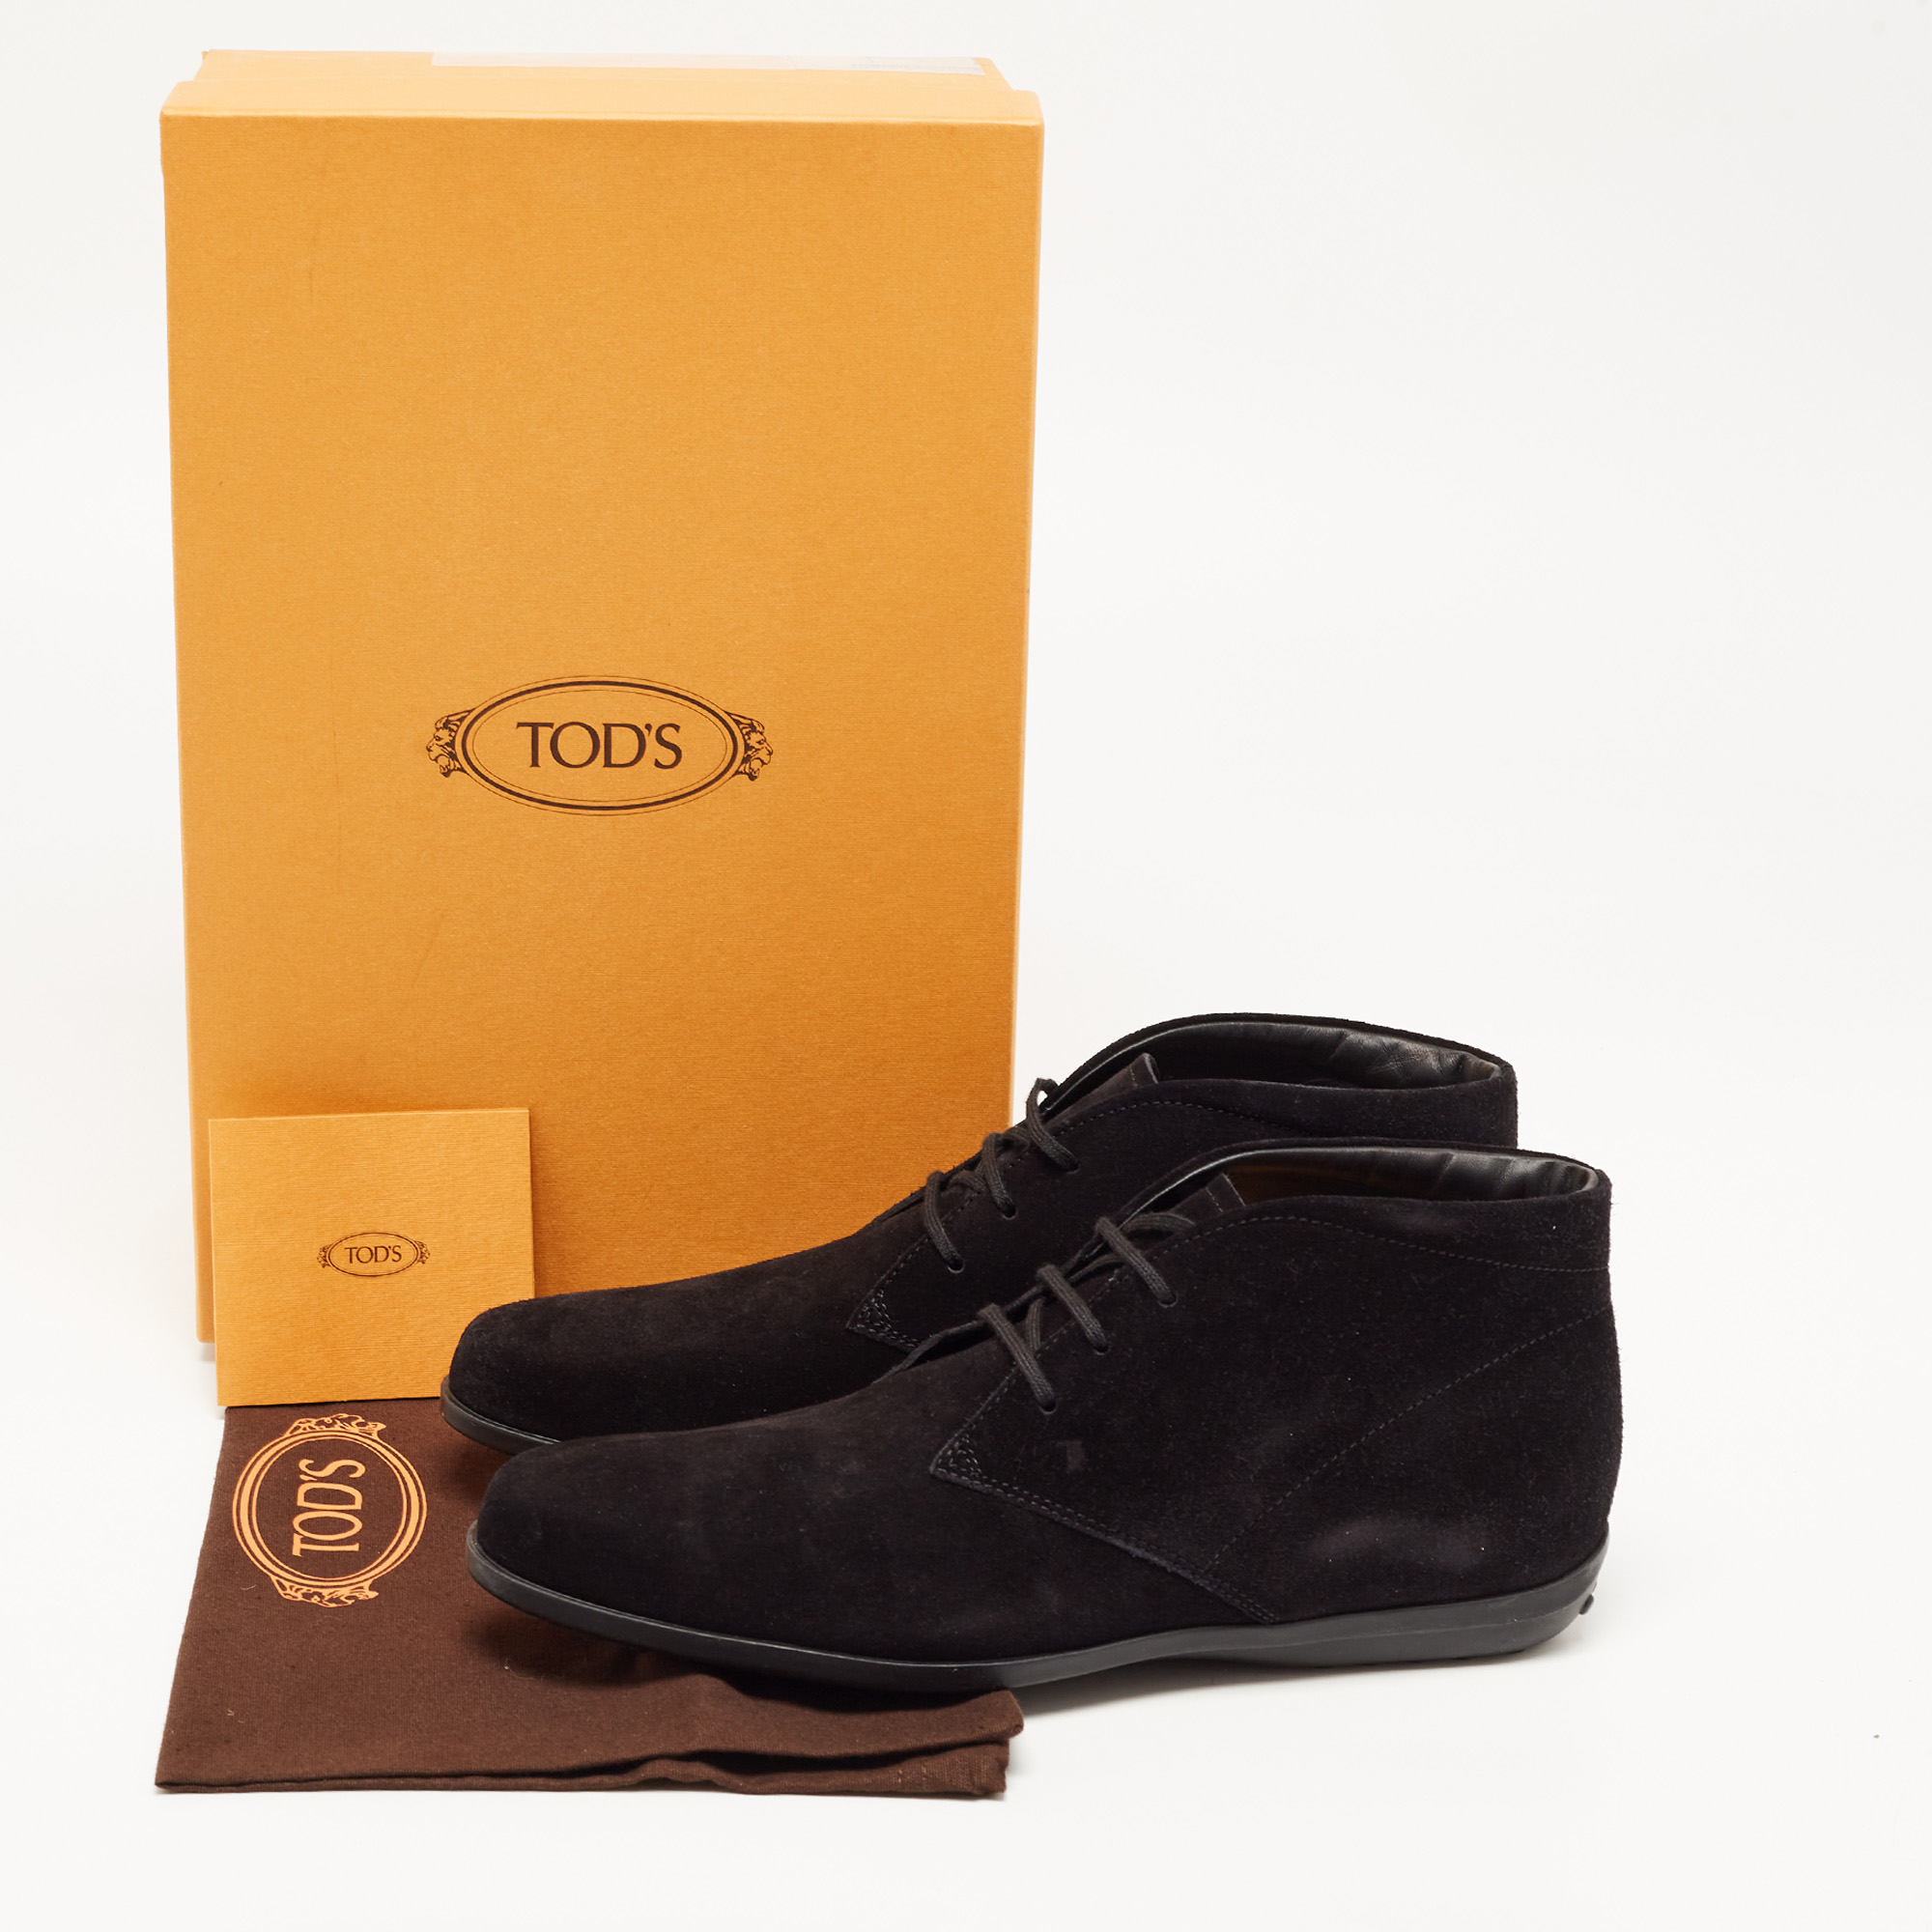 Tod's Black Suede Ankle Length Boots Size 39